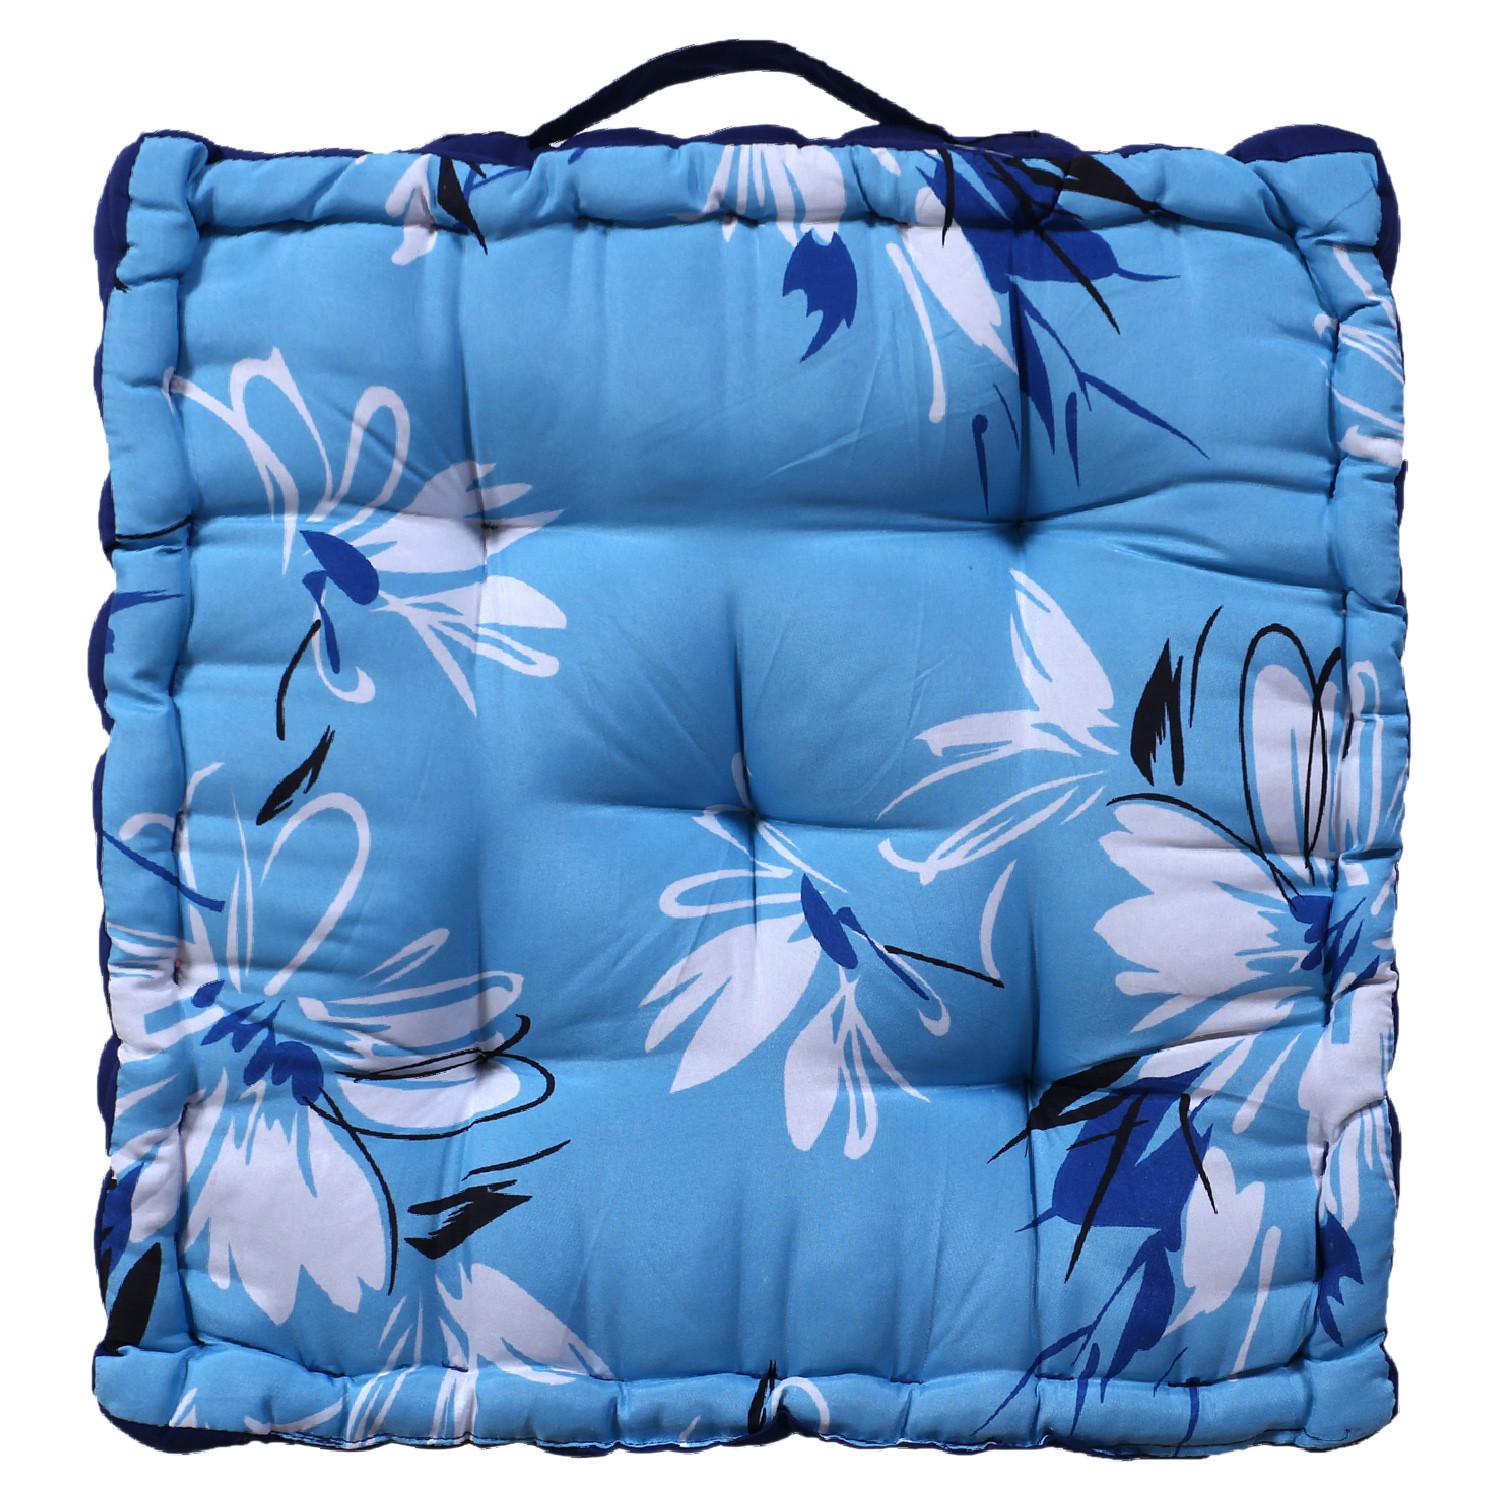 Kuber Industries Square Chair Pad|Comfortable Floral Design Seat Cushion|Soft Cotton Pillow Filler for Seating,Meditation,Yoga,Living Room (Sky Blue)